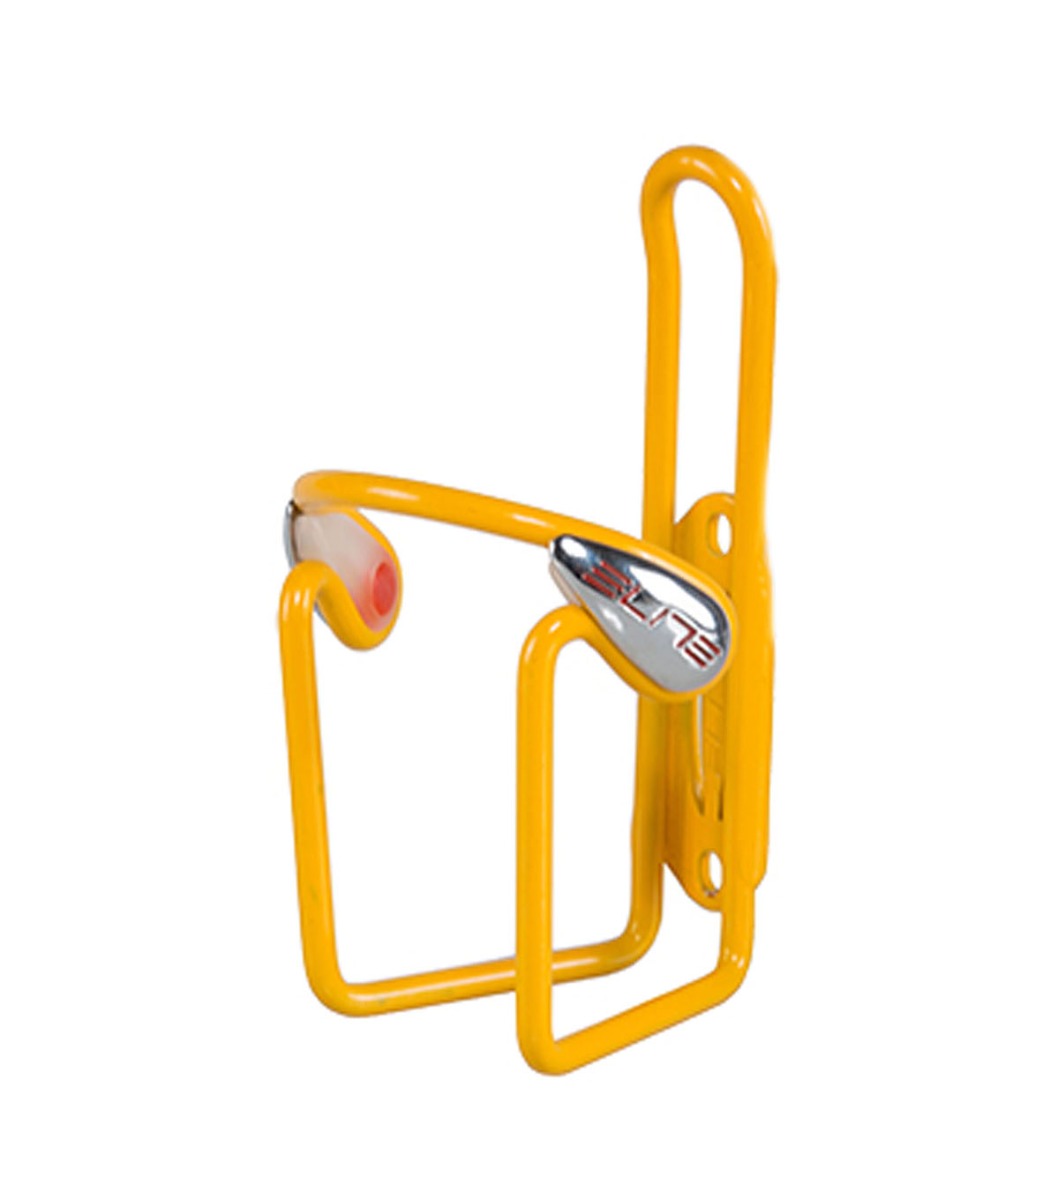 Elite Ciussi Gell Alloy Bottle Cage - Yellow